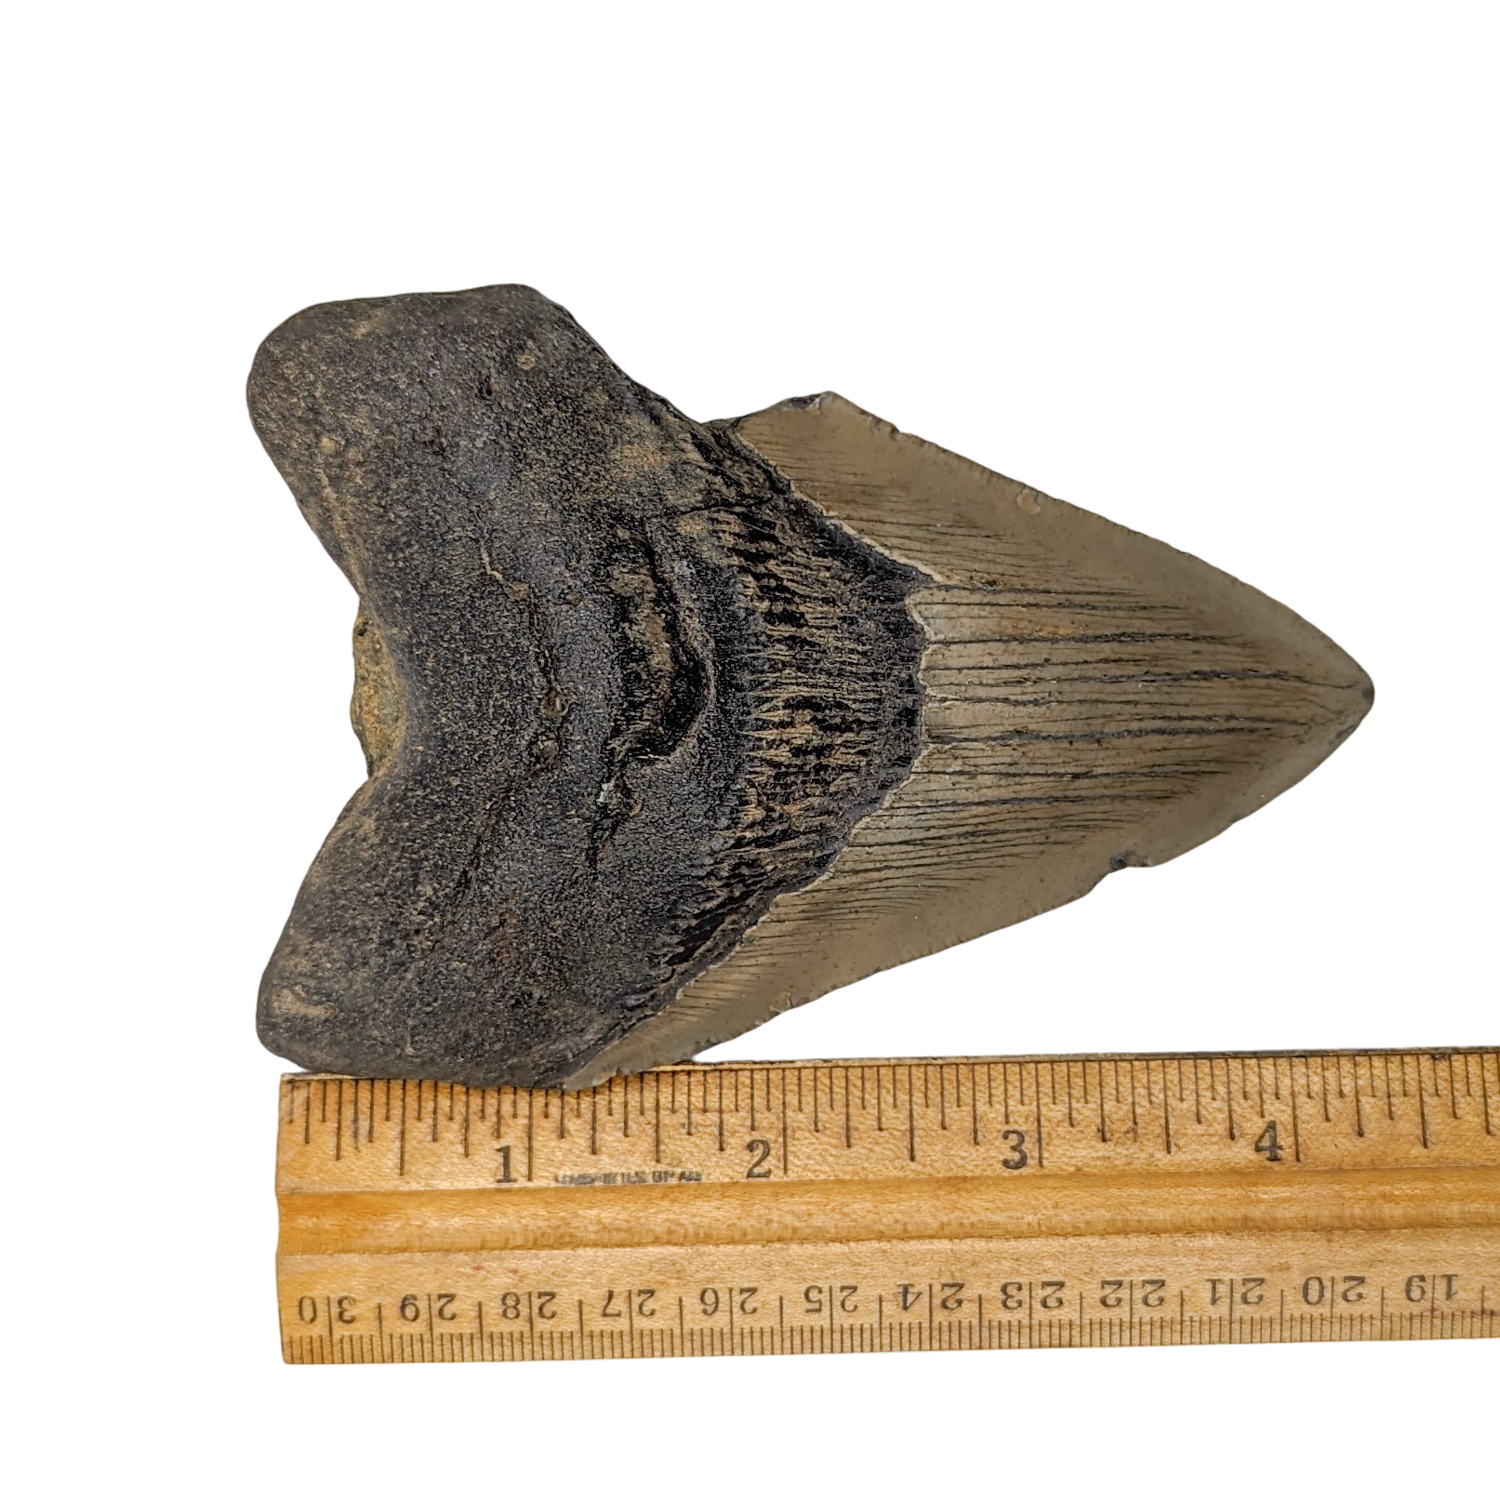 Authentic 4 1/2" Megalodon Shark Tooth Fossil